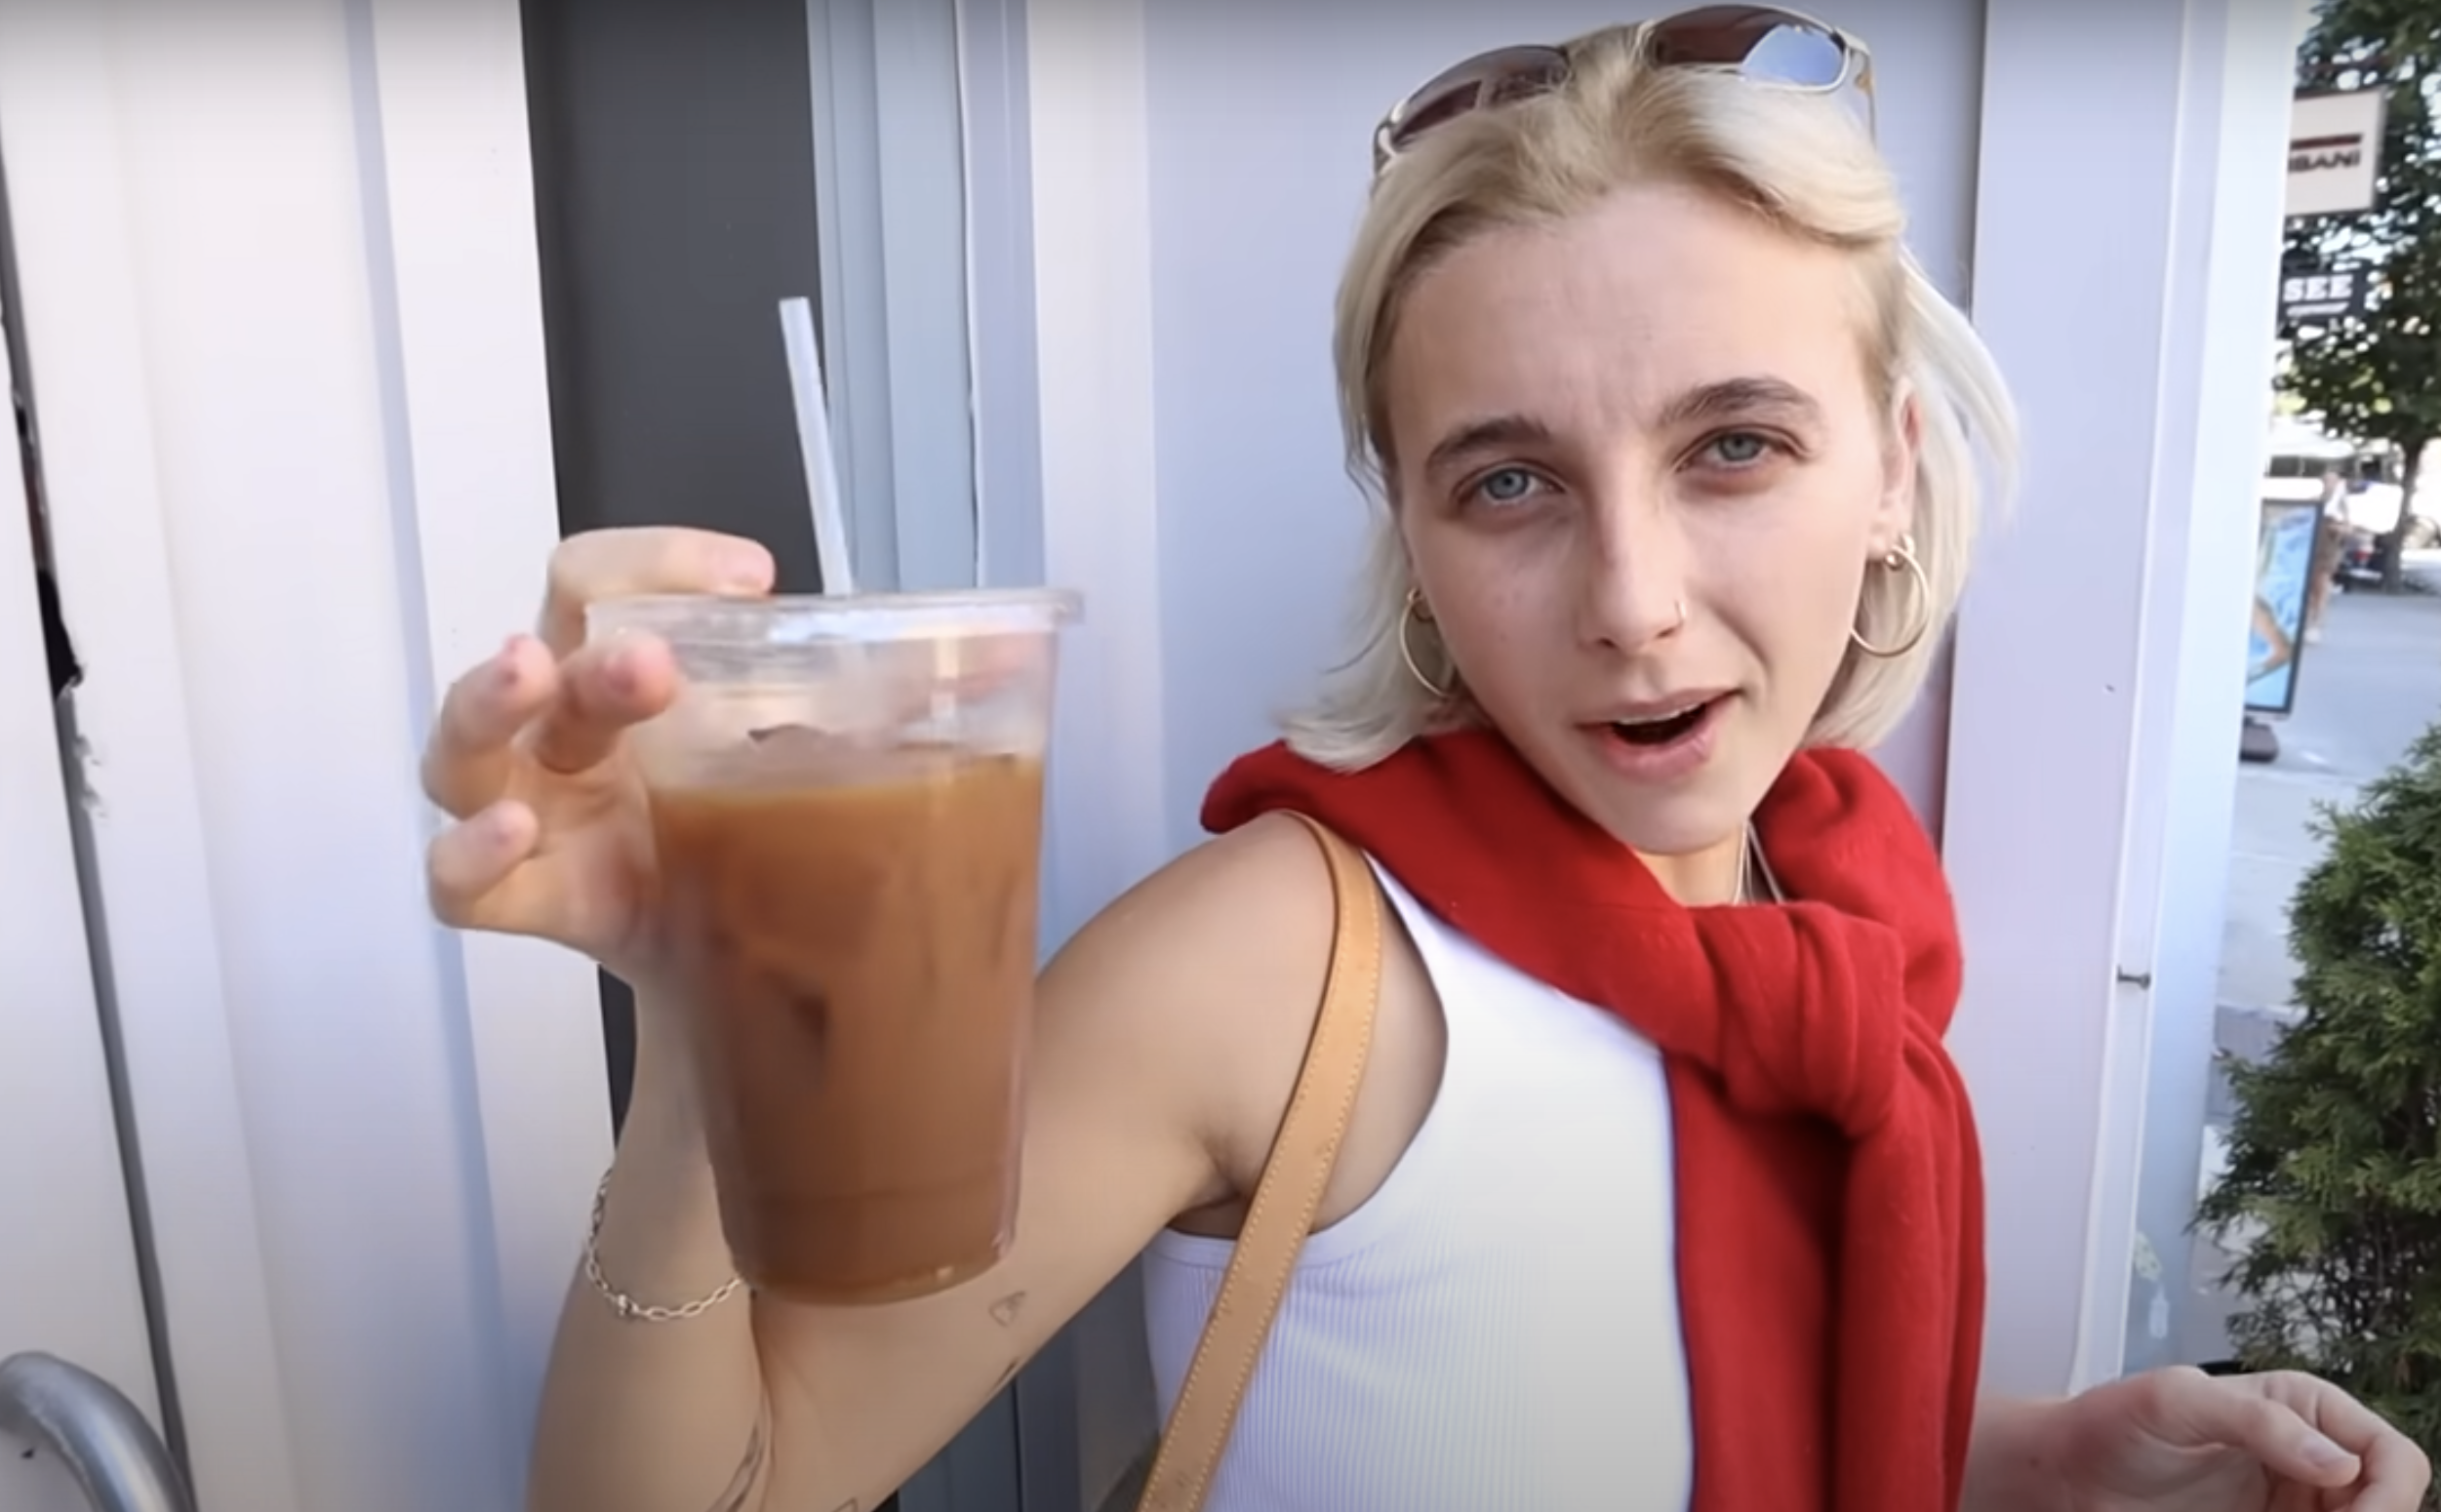 Woman holding iced coffee, wearing a white top, red scarf, and sunglasses on head